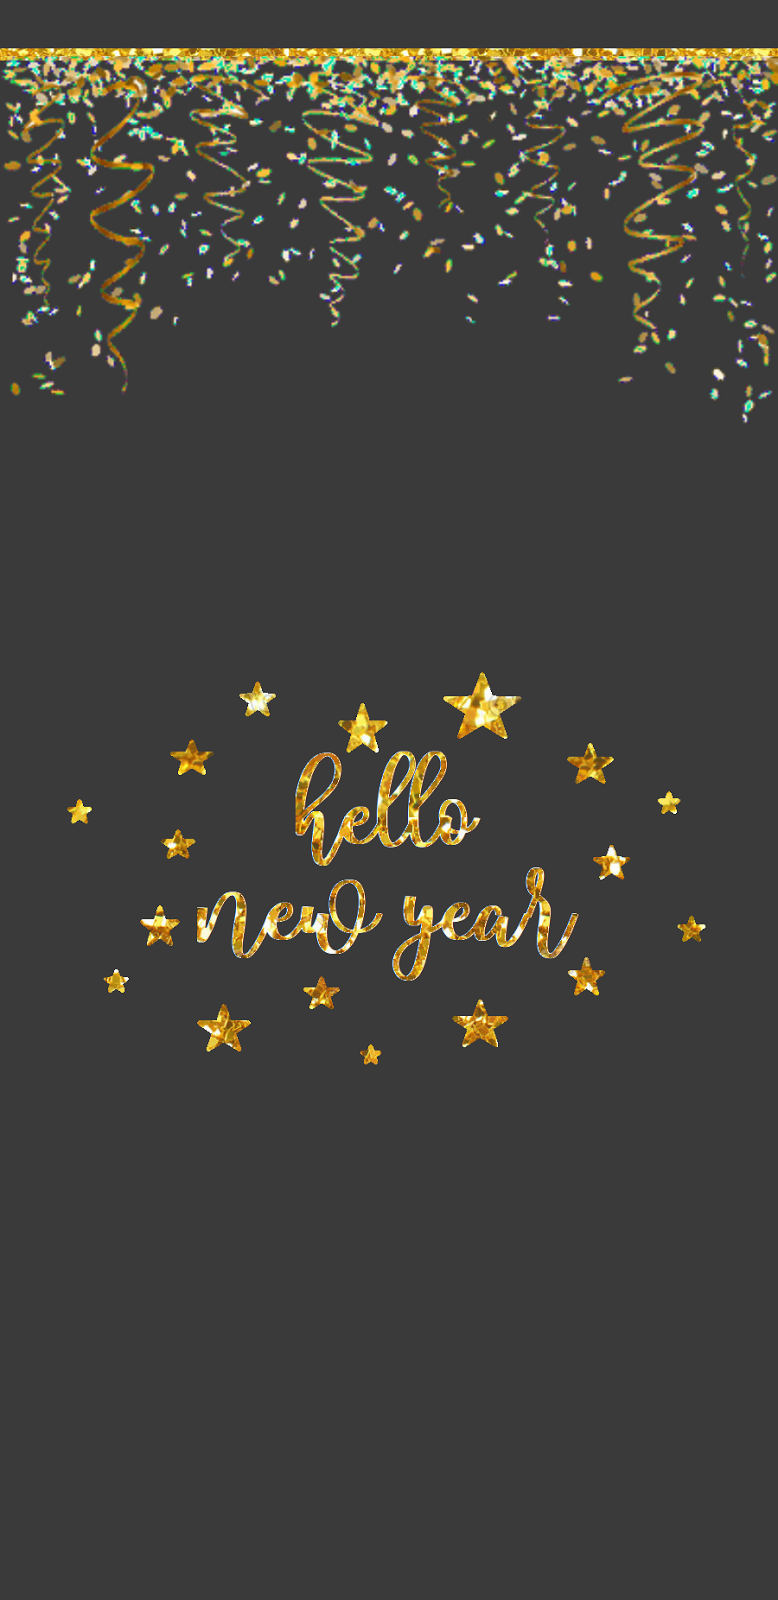 note8love. New year's eve wallpaper, Happy new year wallpaper, New year wallpaper